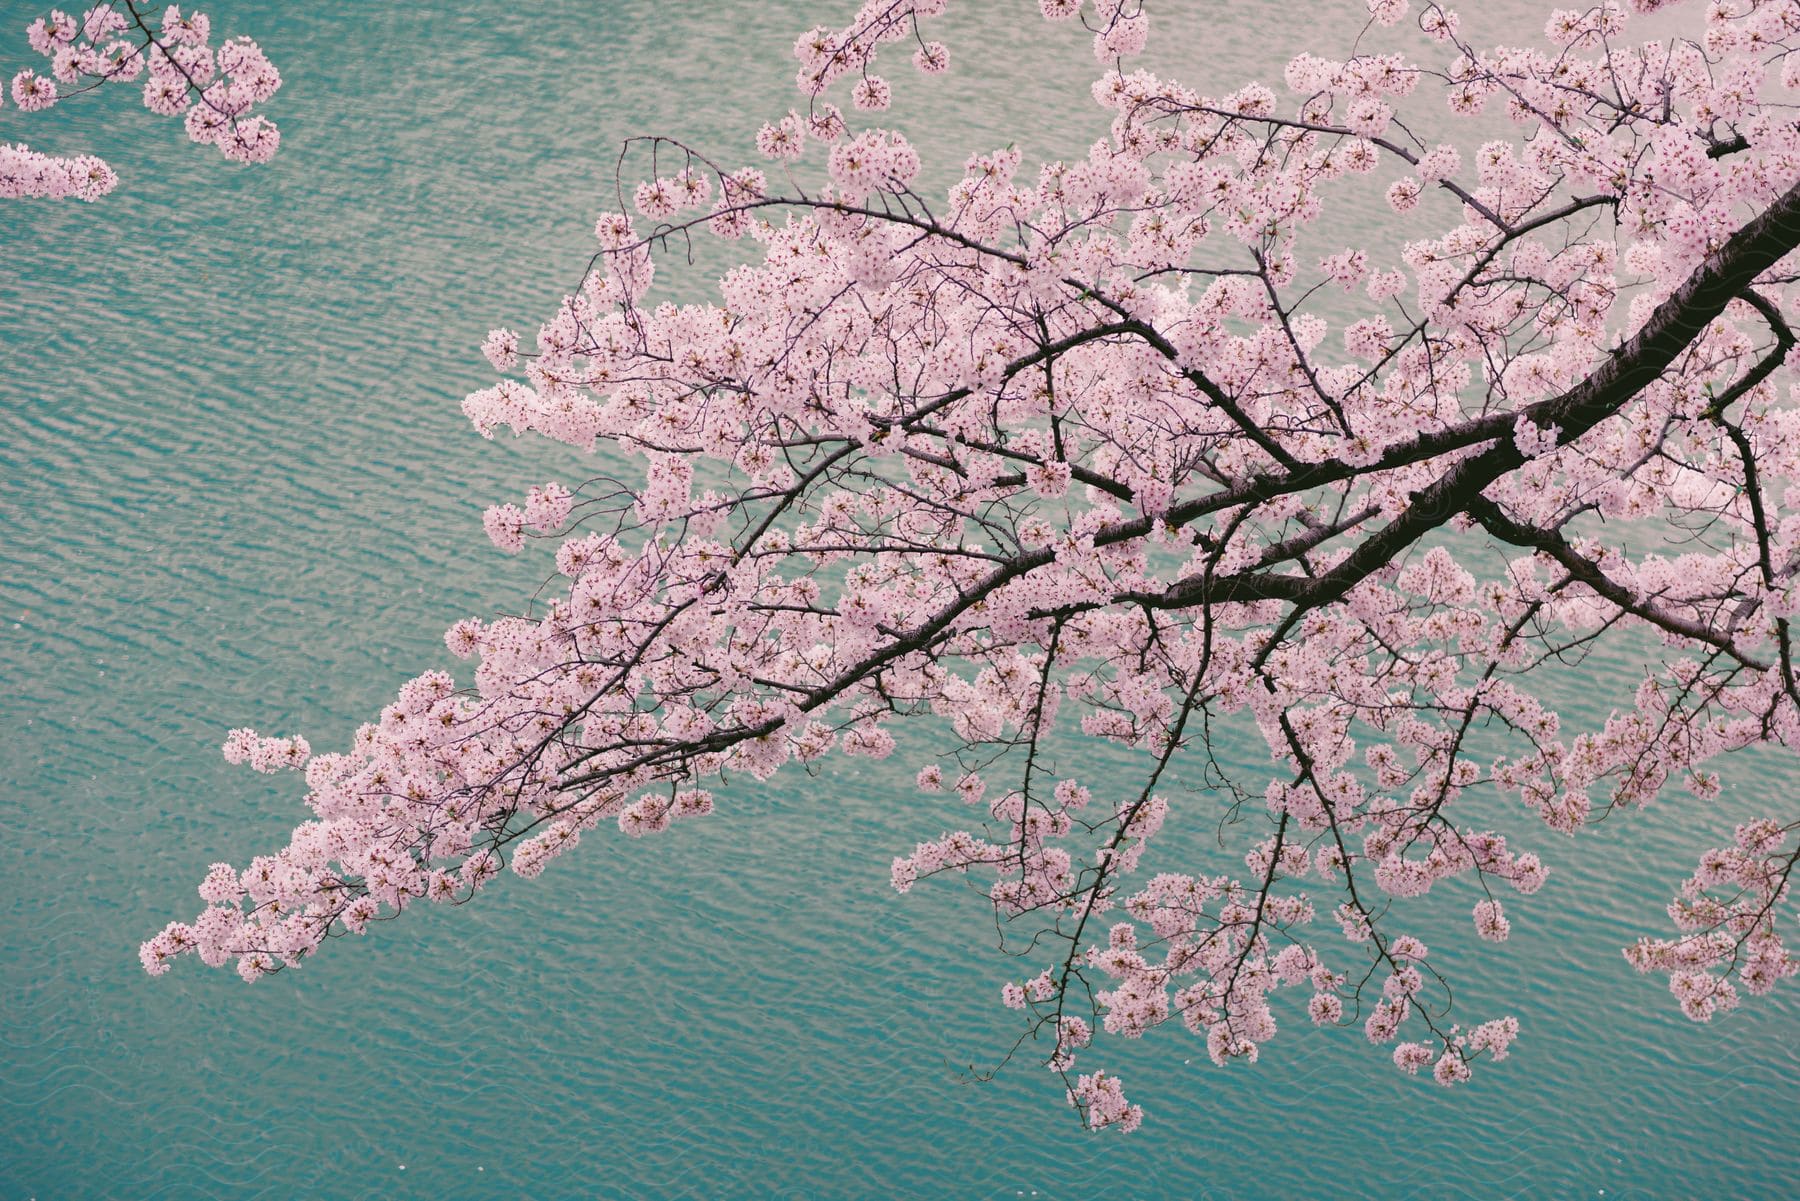 Stock photo of a tree with pink flowers above water